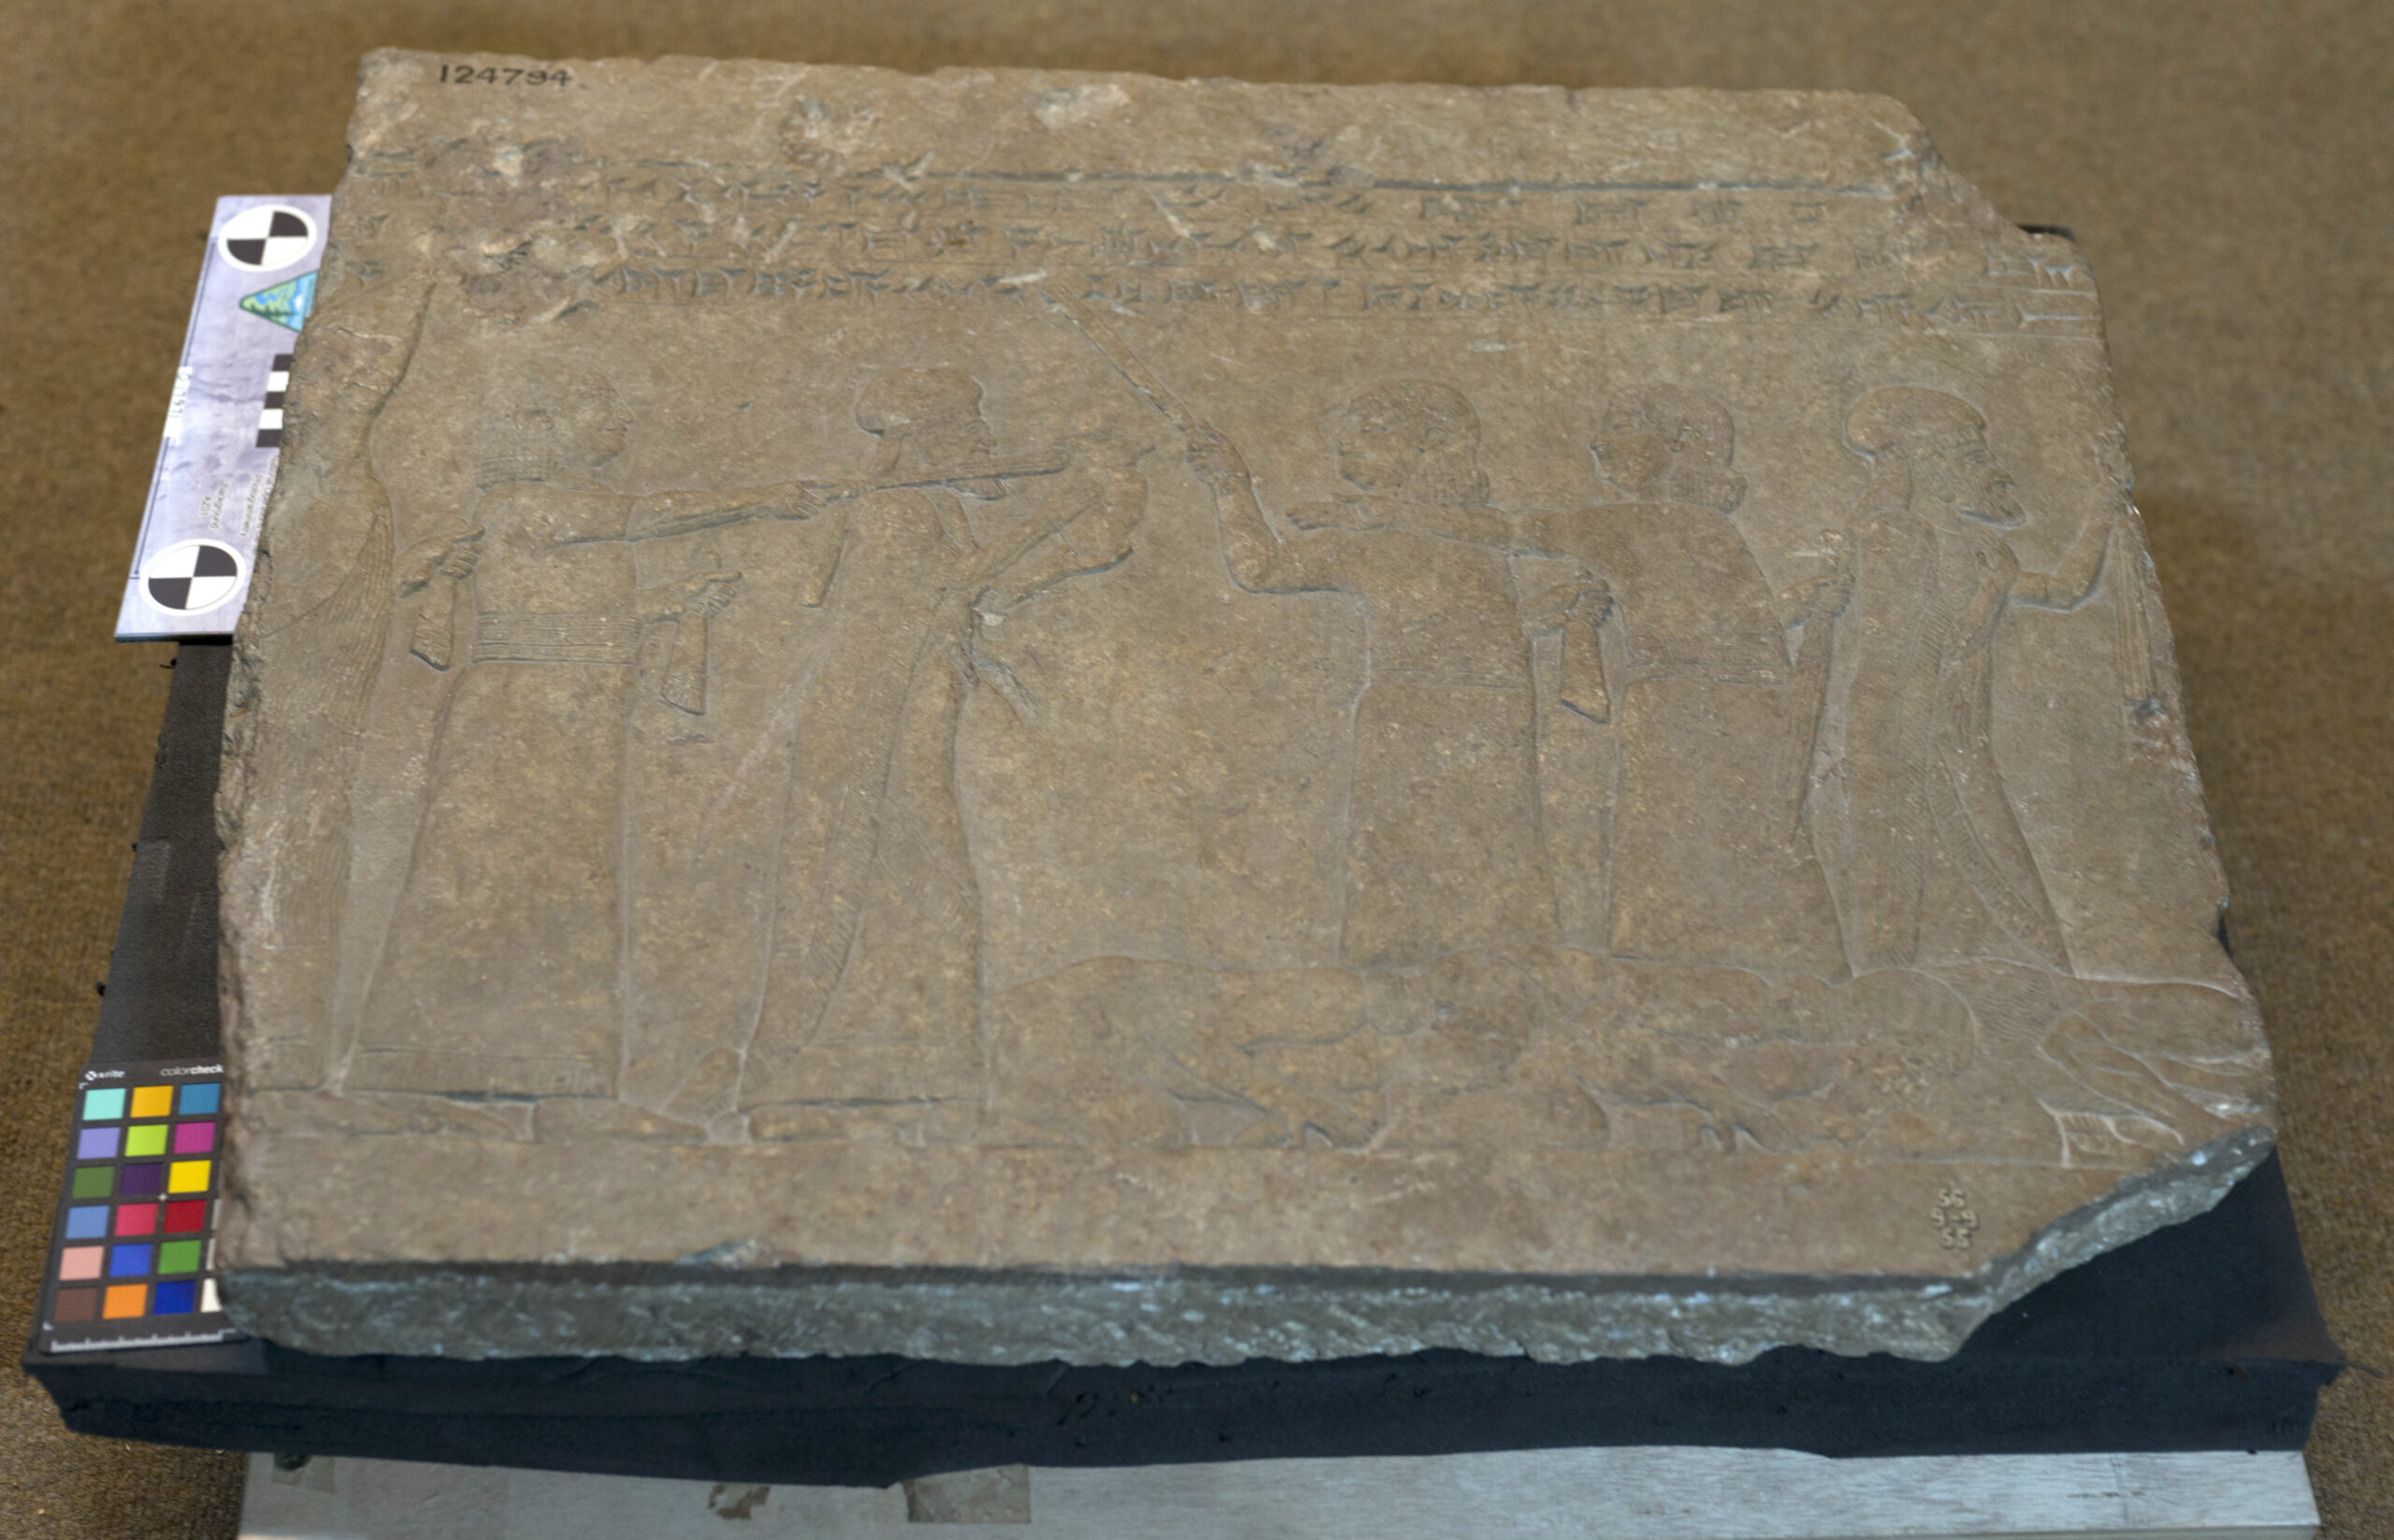 The photo shows the relief BM124794 of the British Museum, where Elamite nobles bring presents to the Neo-Assyrian king Assurbanipal.